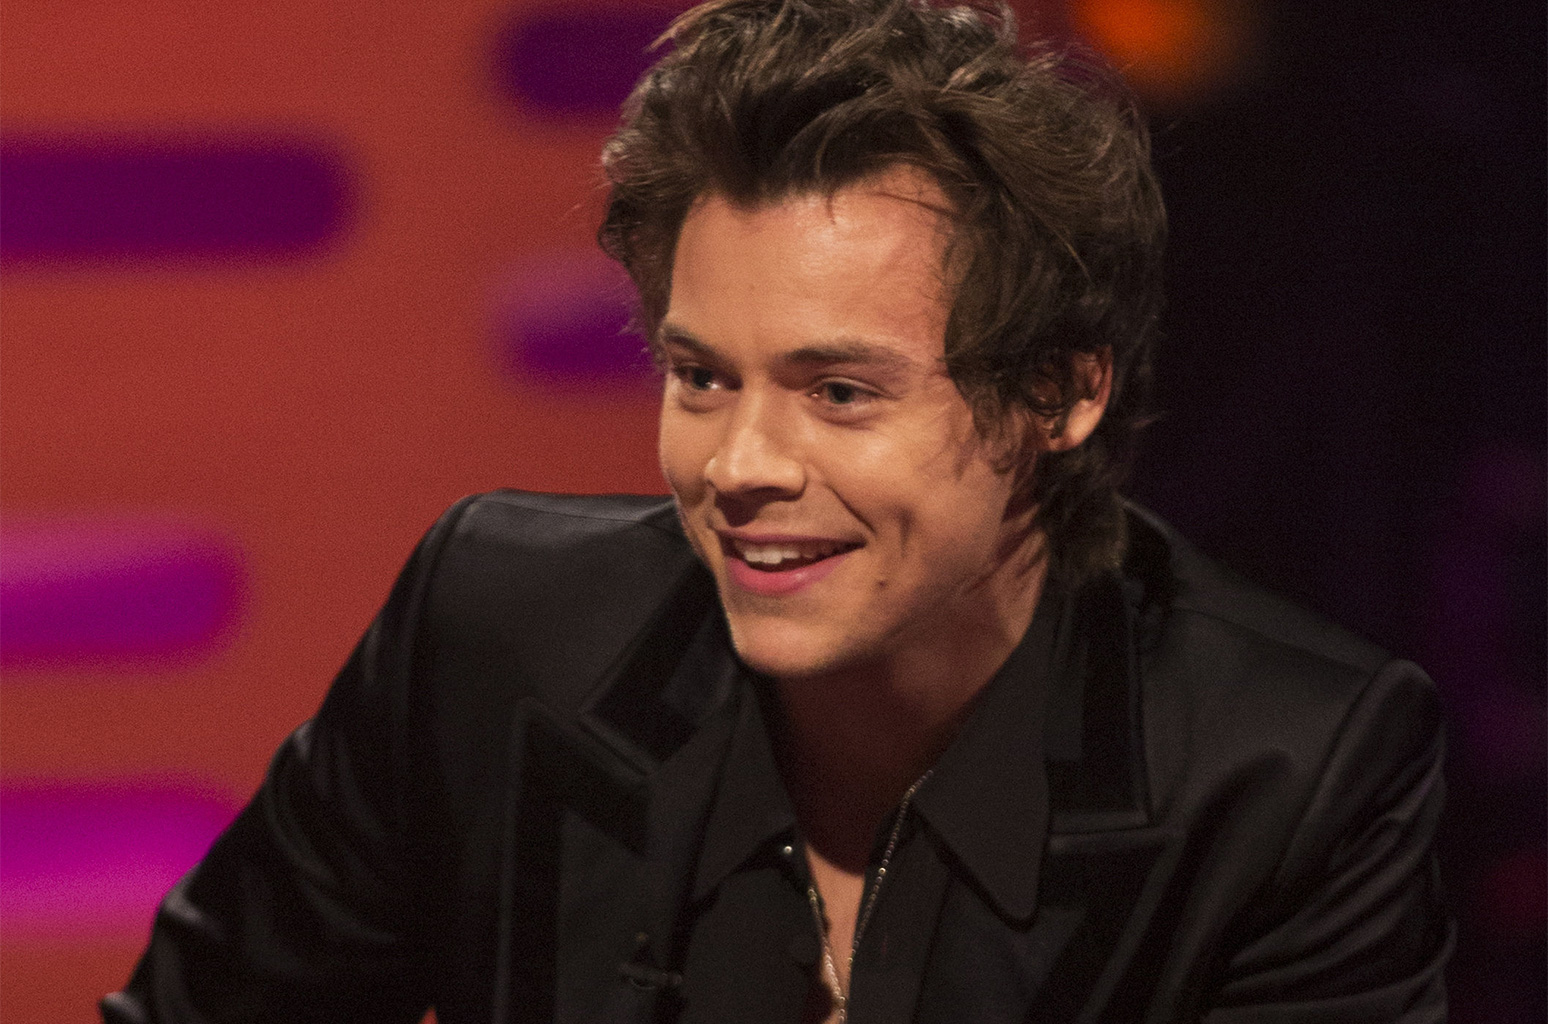 Harry Styles presento “Sign Of The Times” en The Graham Norton Show. Cusica plus.